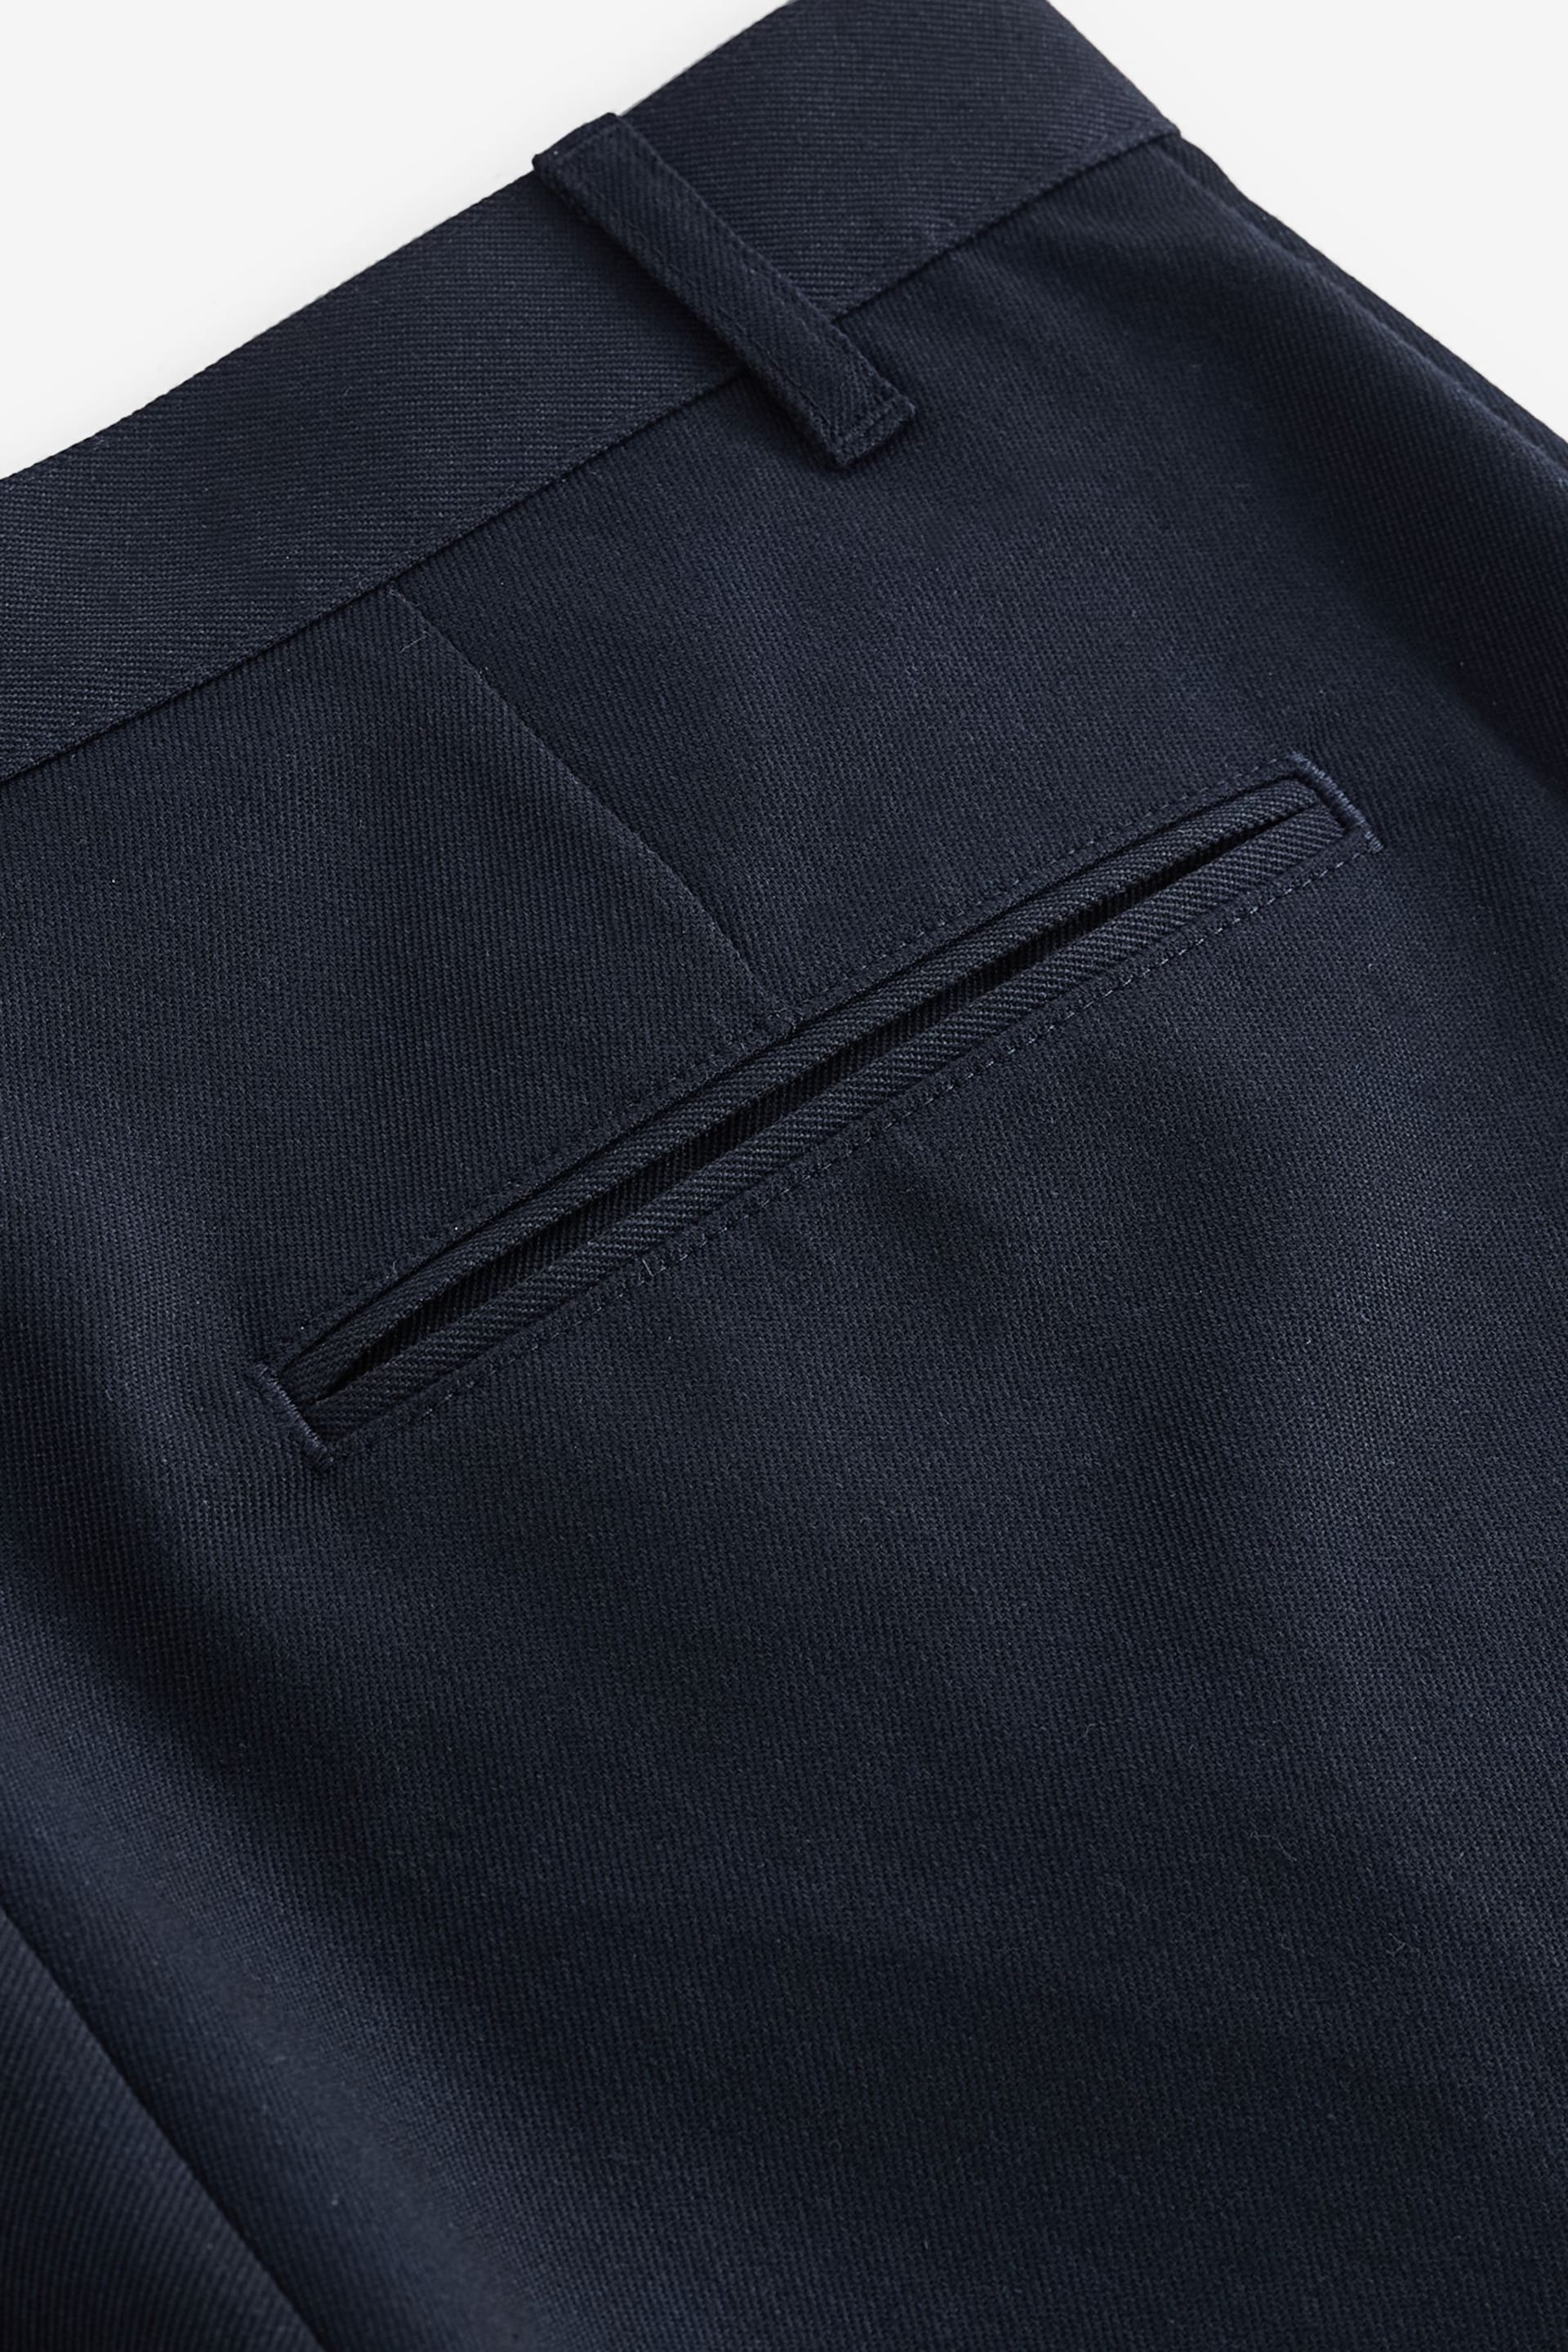 Navy Slim Plain Front Smart Trousers - Image 8 of 9